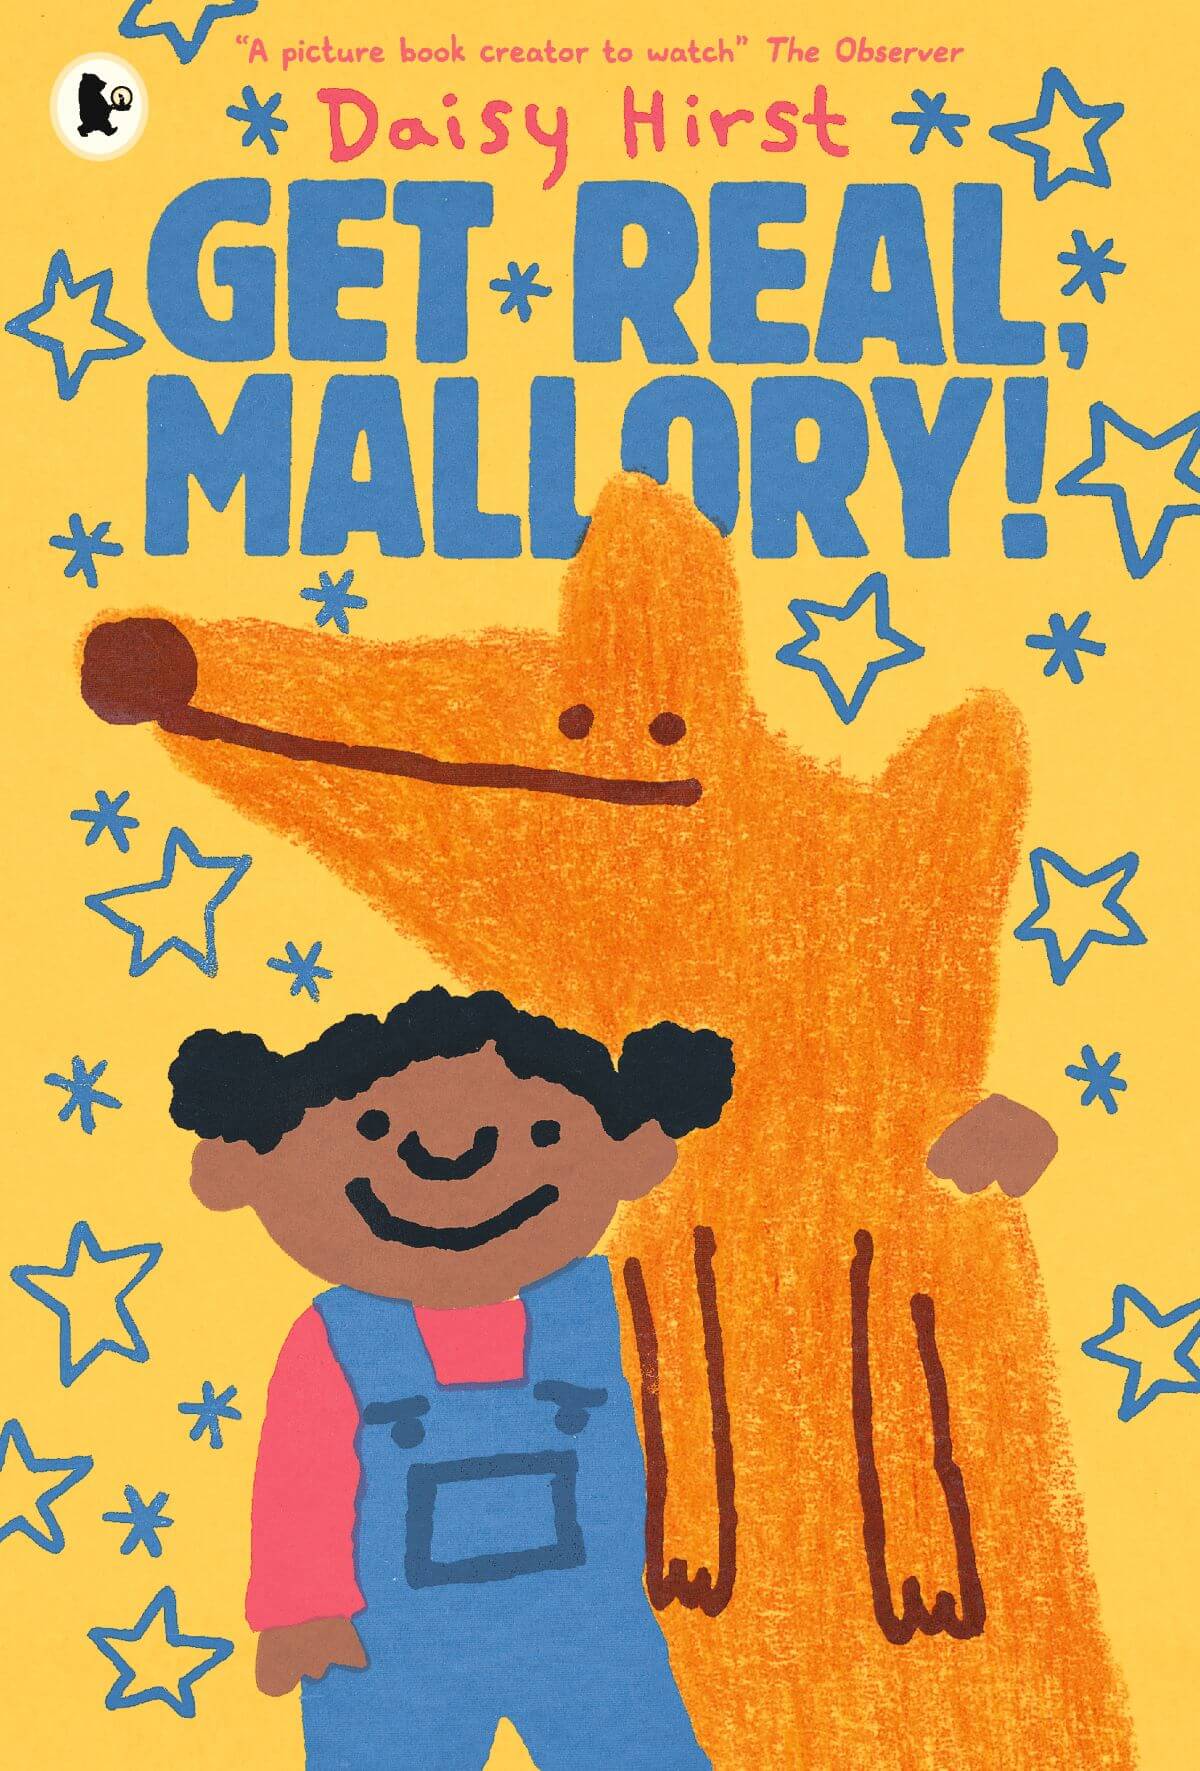 A yellow illustrated children's book cover with a child and a large orange dog